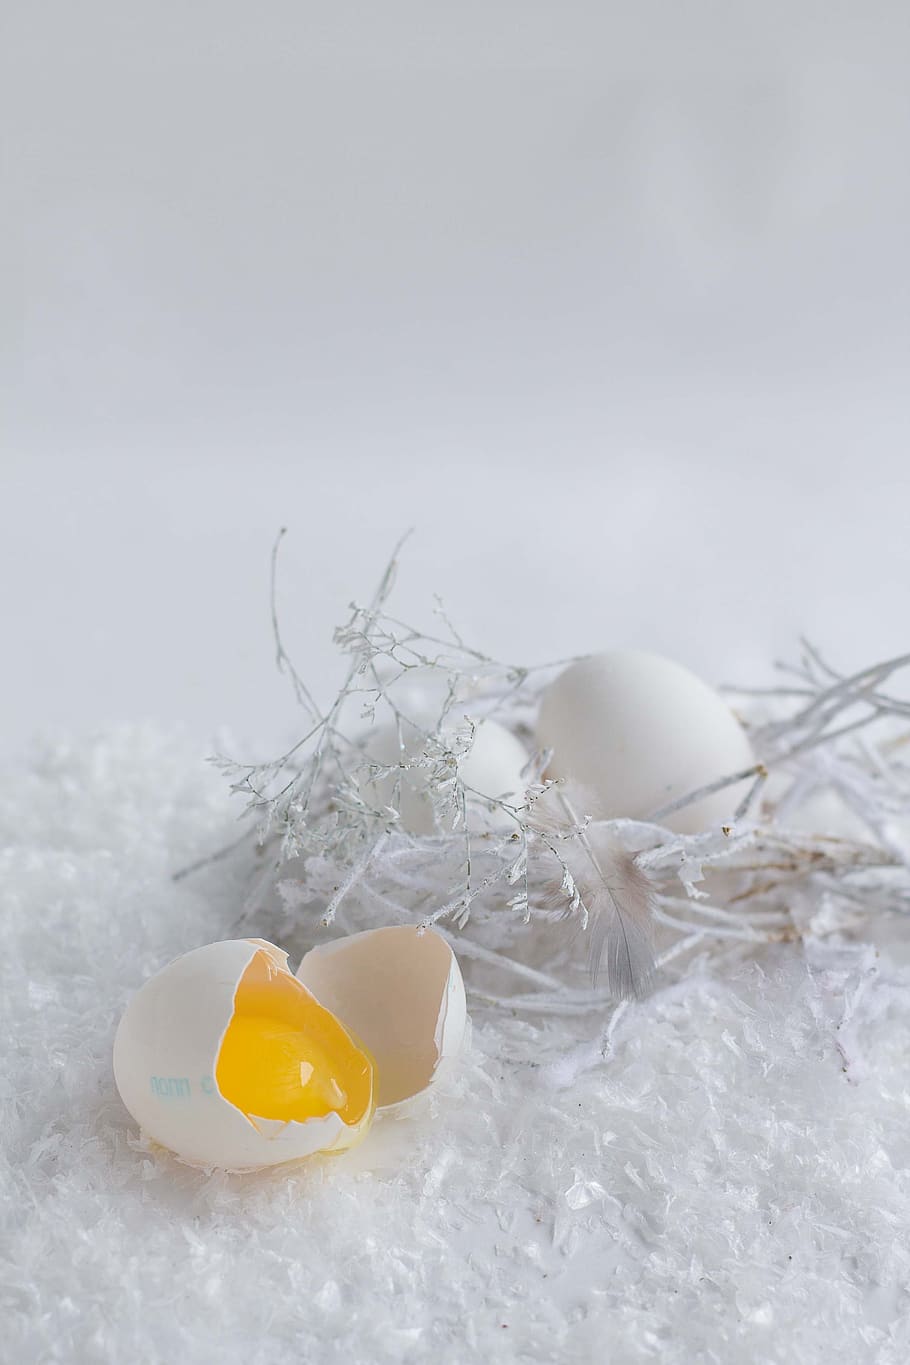 egg, white, easter, edible, straw, still life, close-up, food and drink, nature, white color